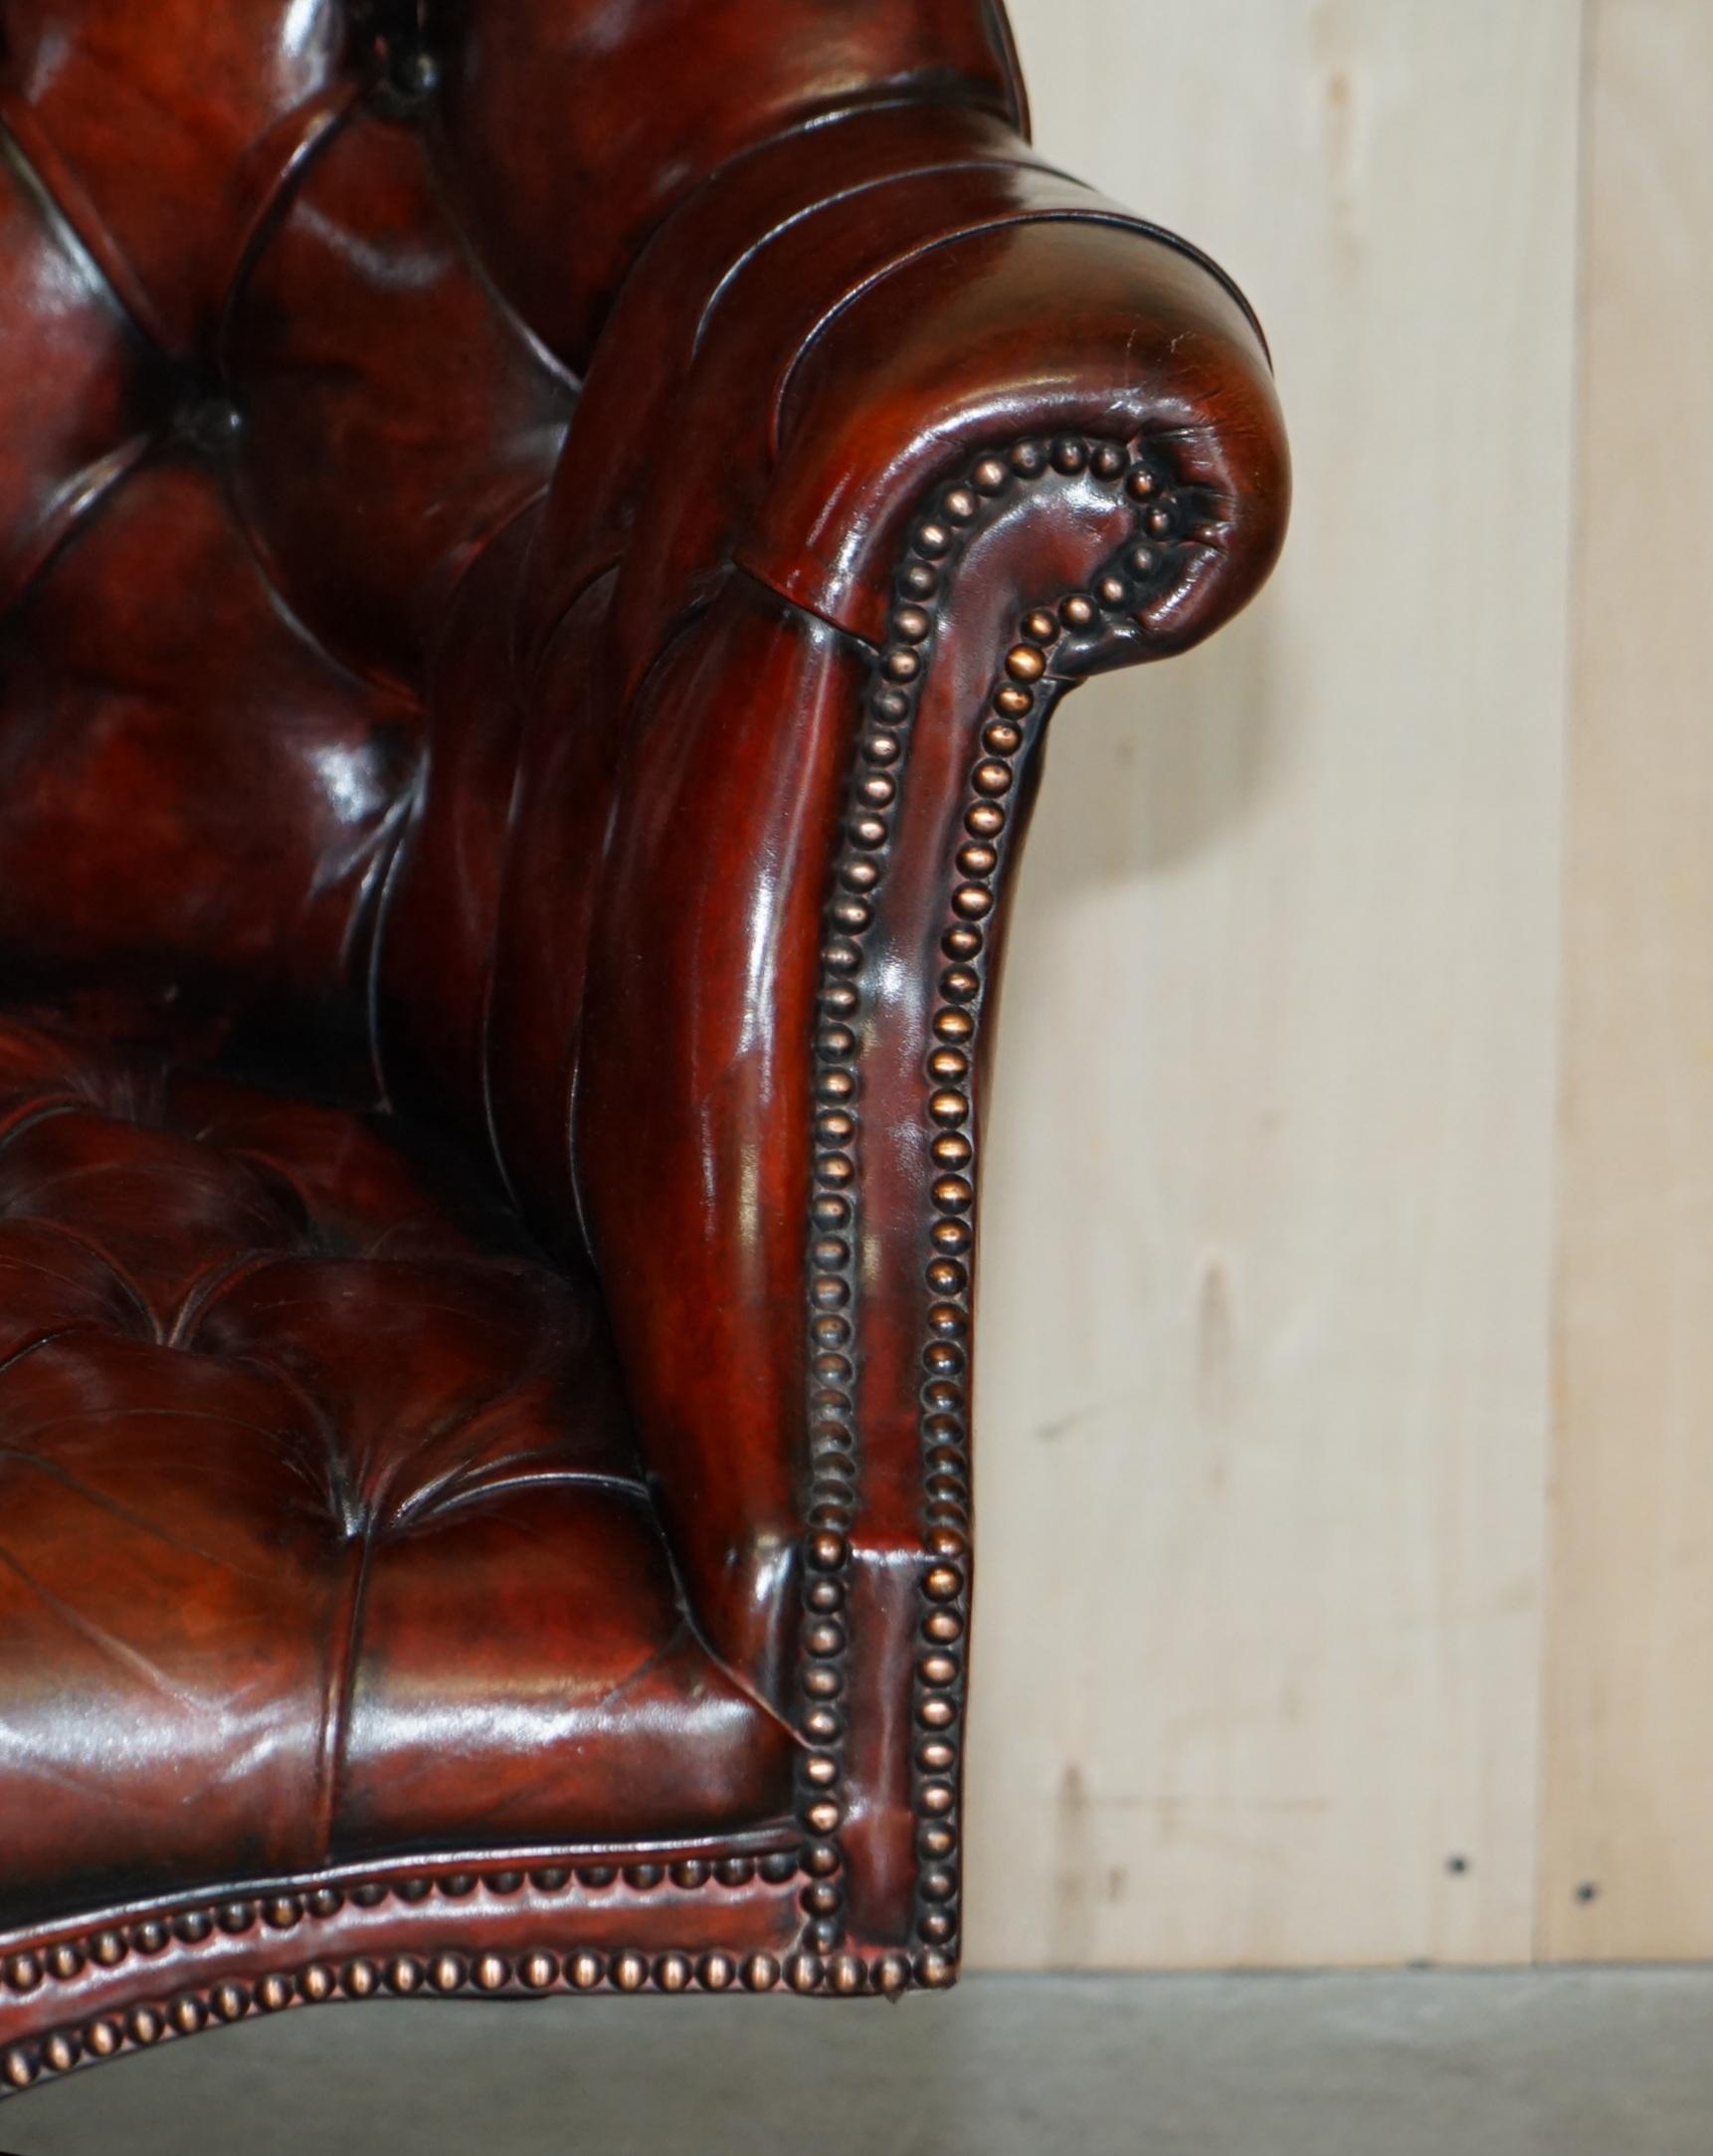 chesterfield office chair